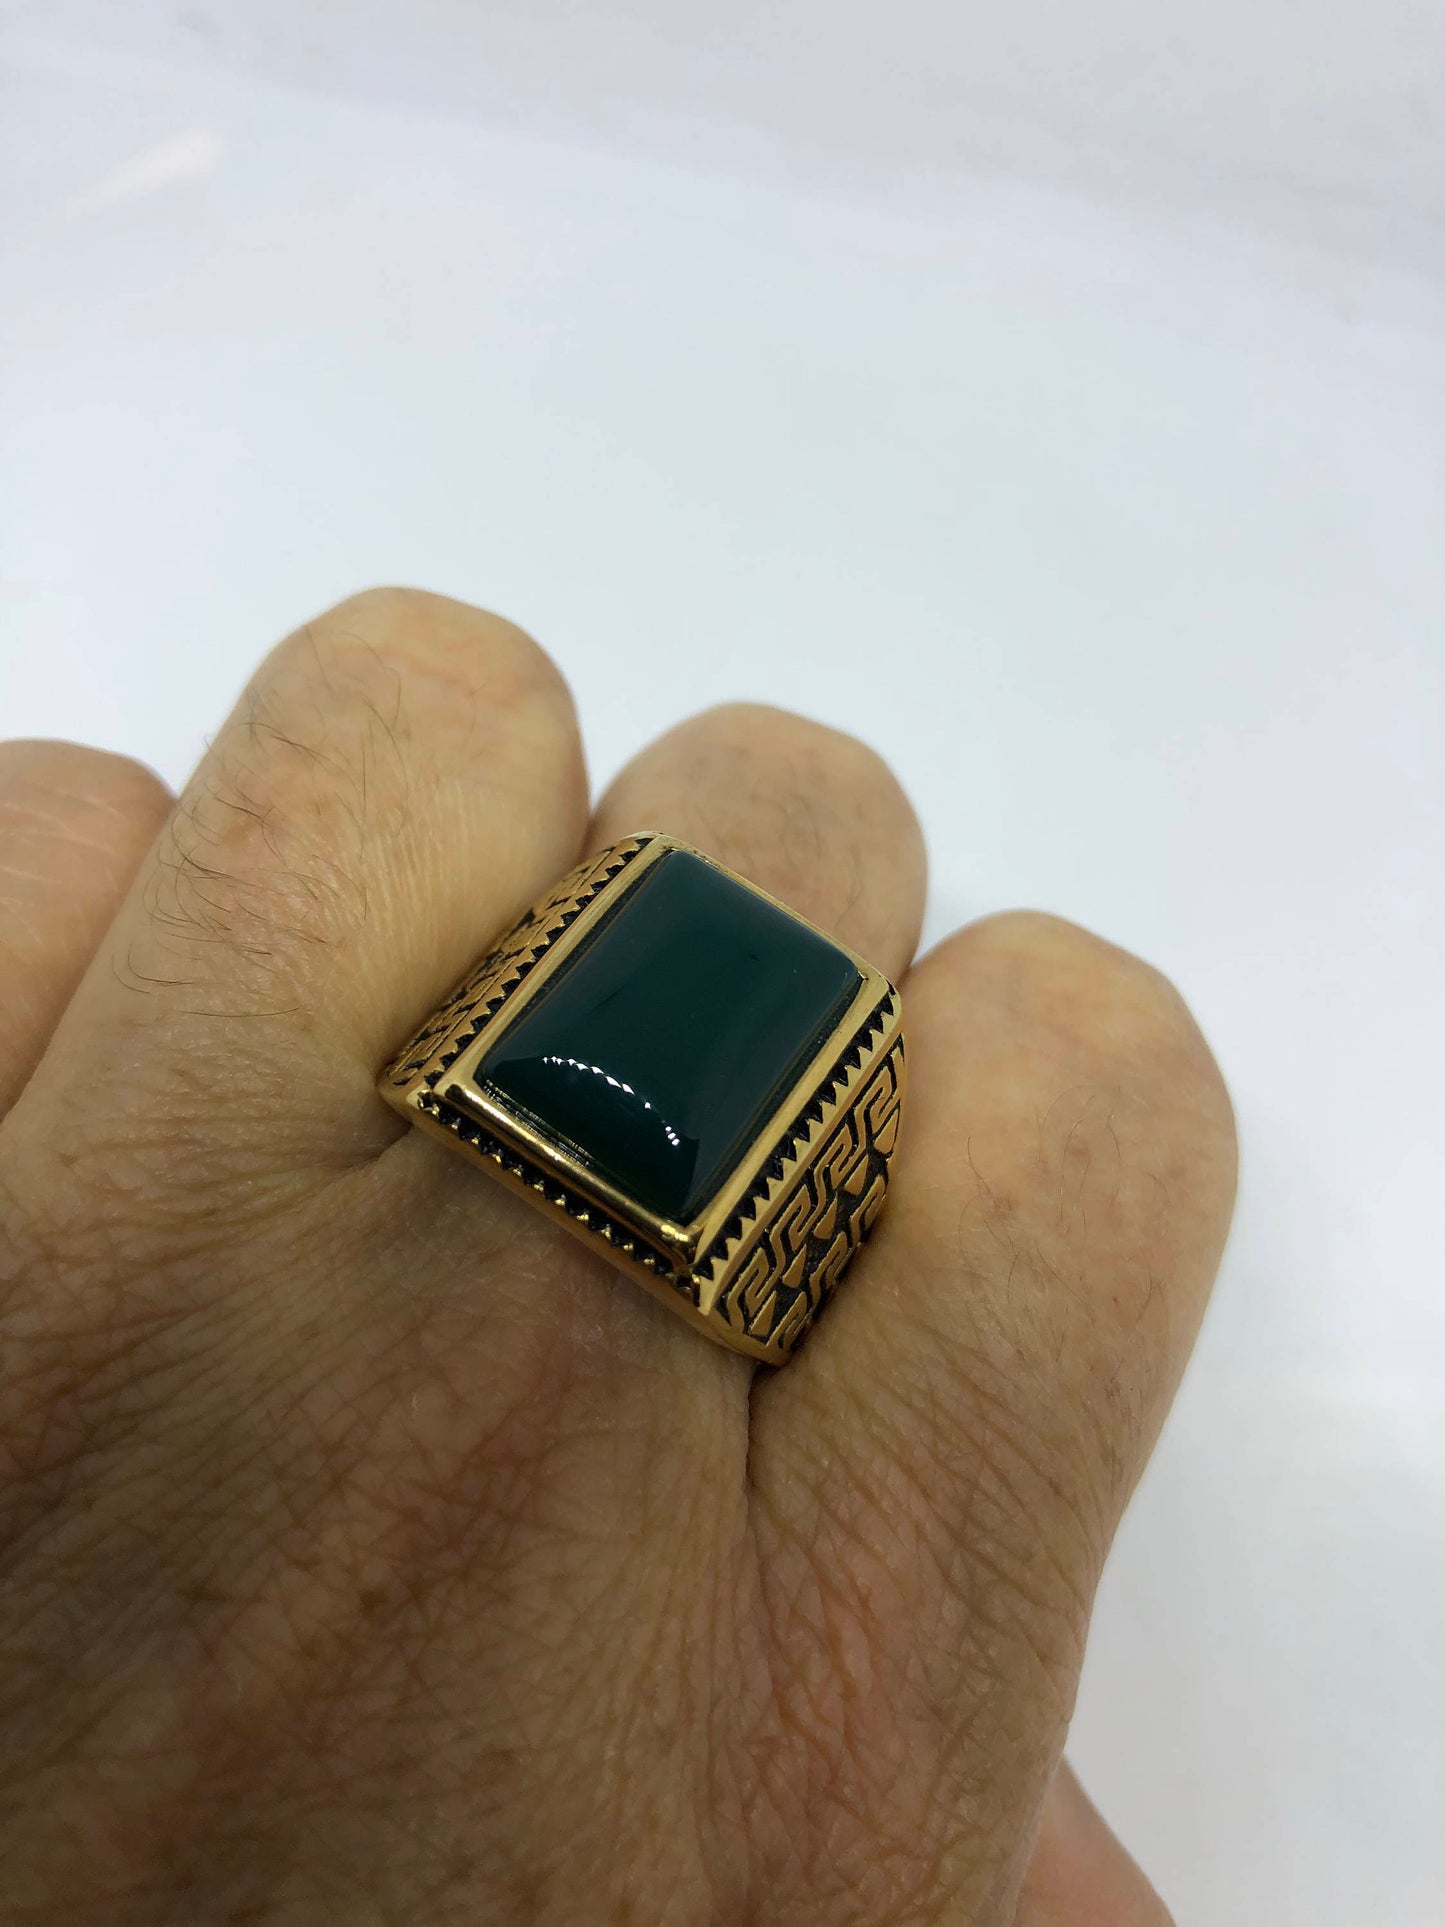 Vintage Gothic Gold Finished Genuine Green Chrysopraise Mens Ring